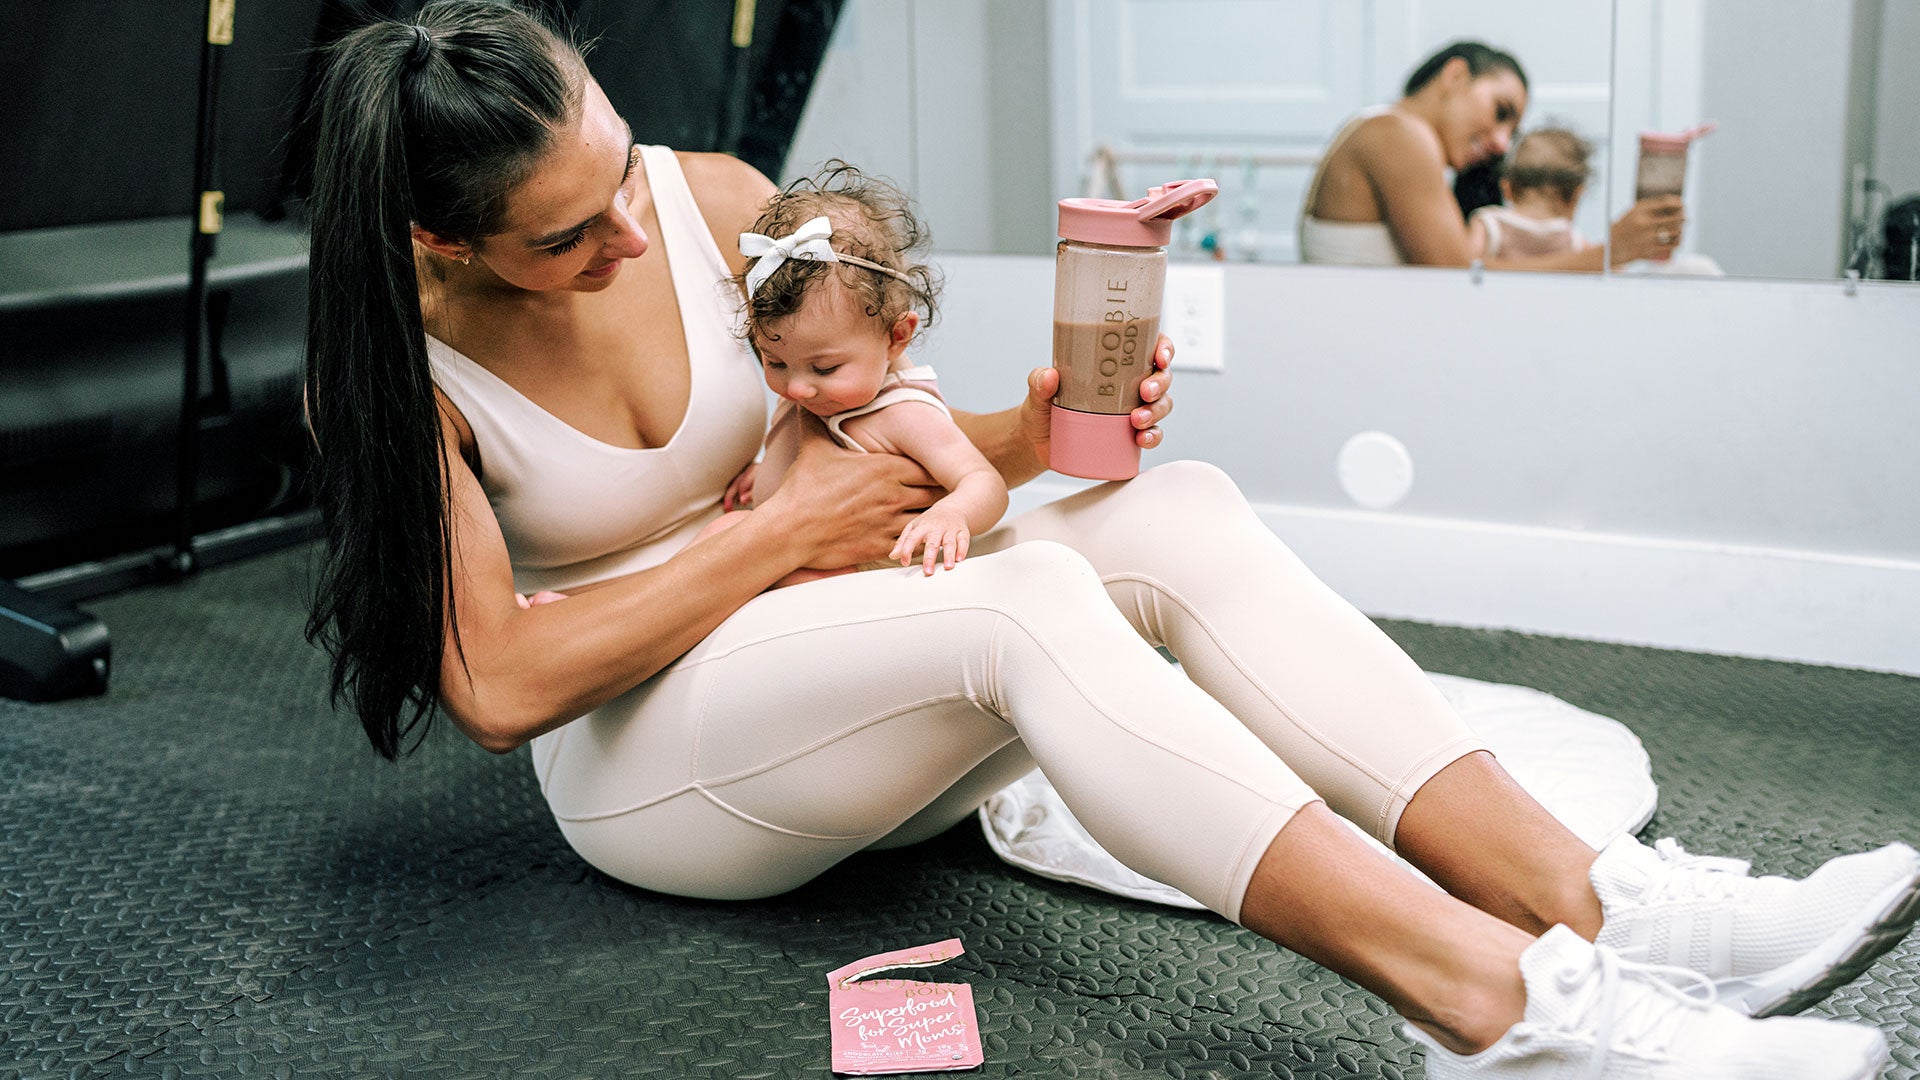 6 Tips to Losing Weight While Breastfeeding & Maintaining Your Milk Supply